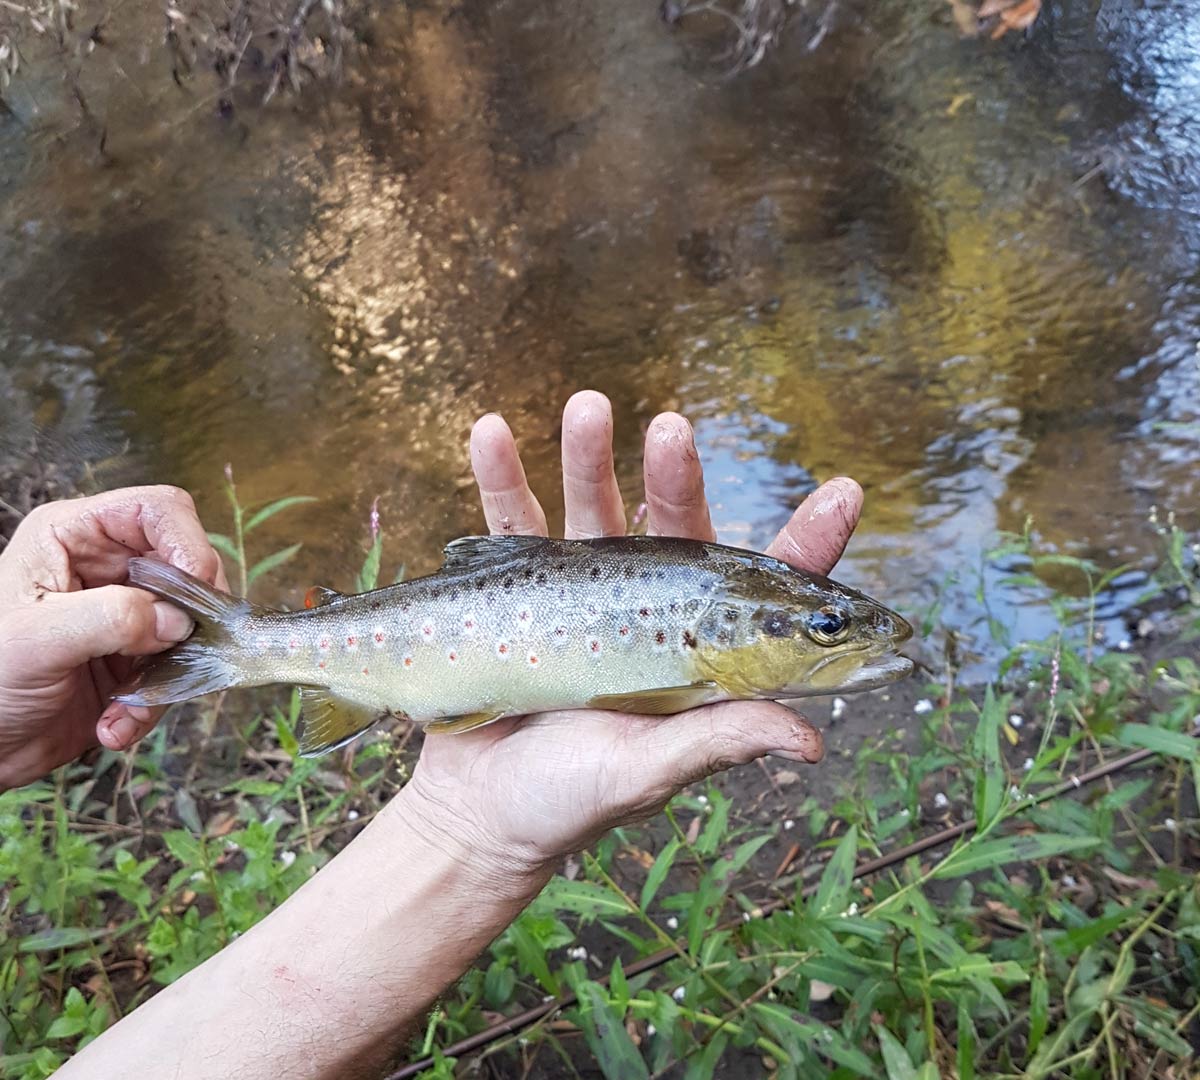 A trout caught at The Fernglade.